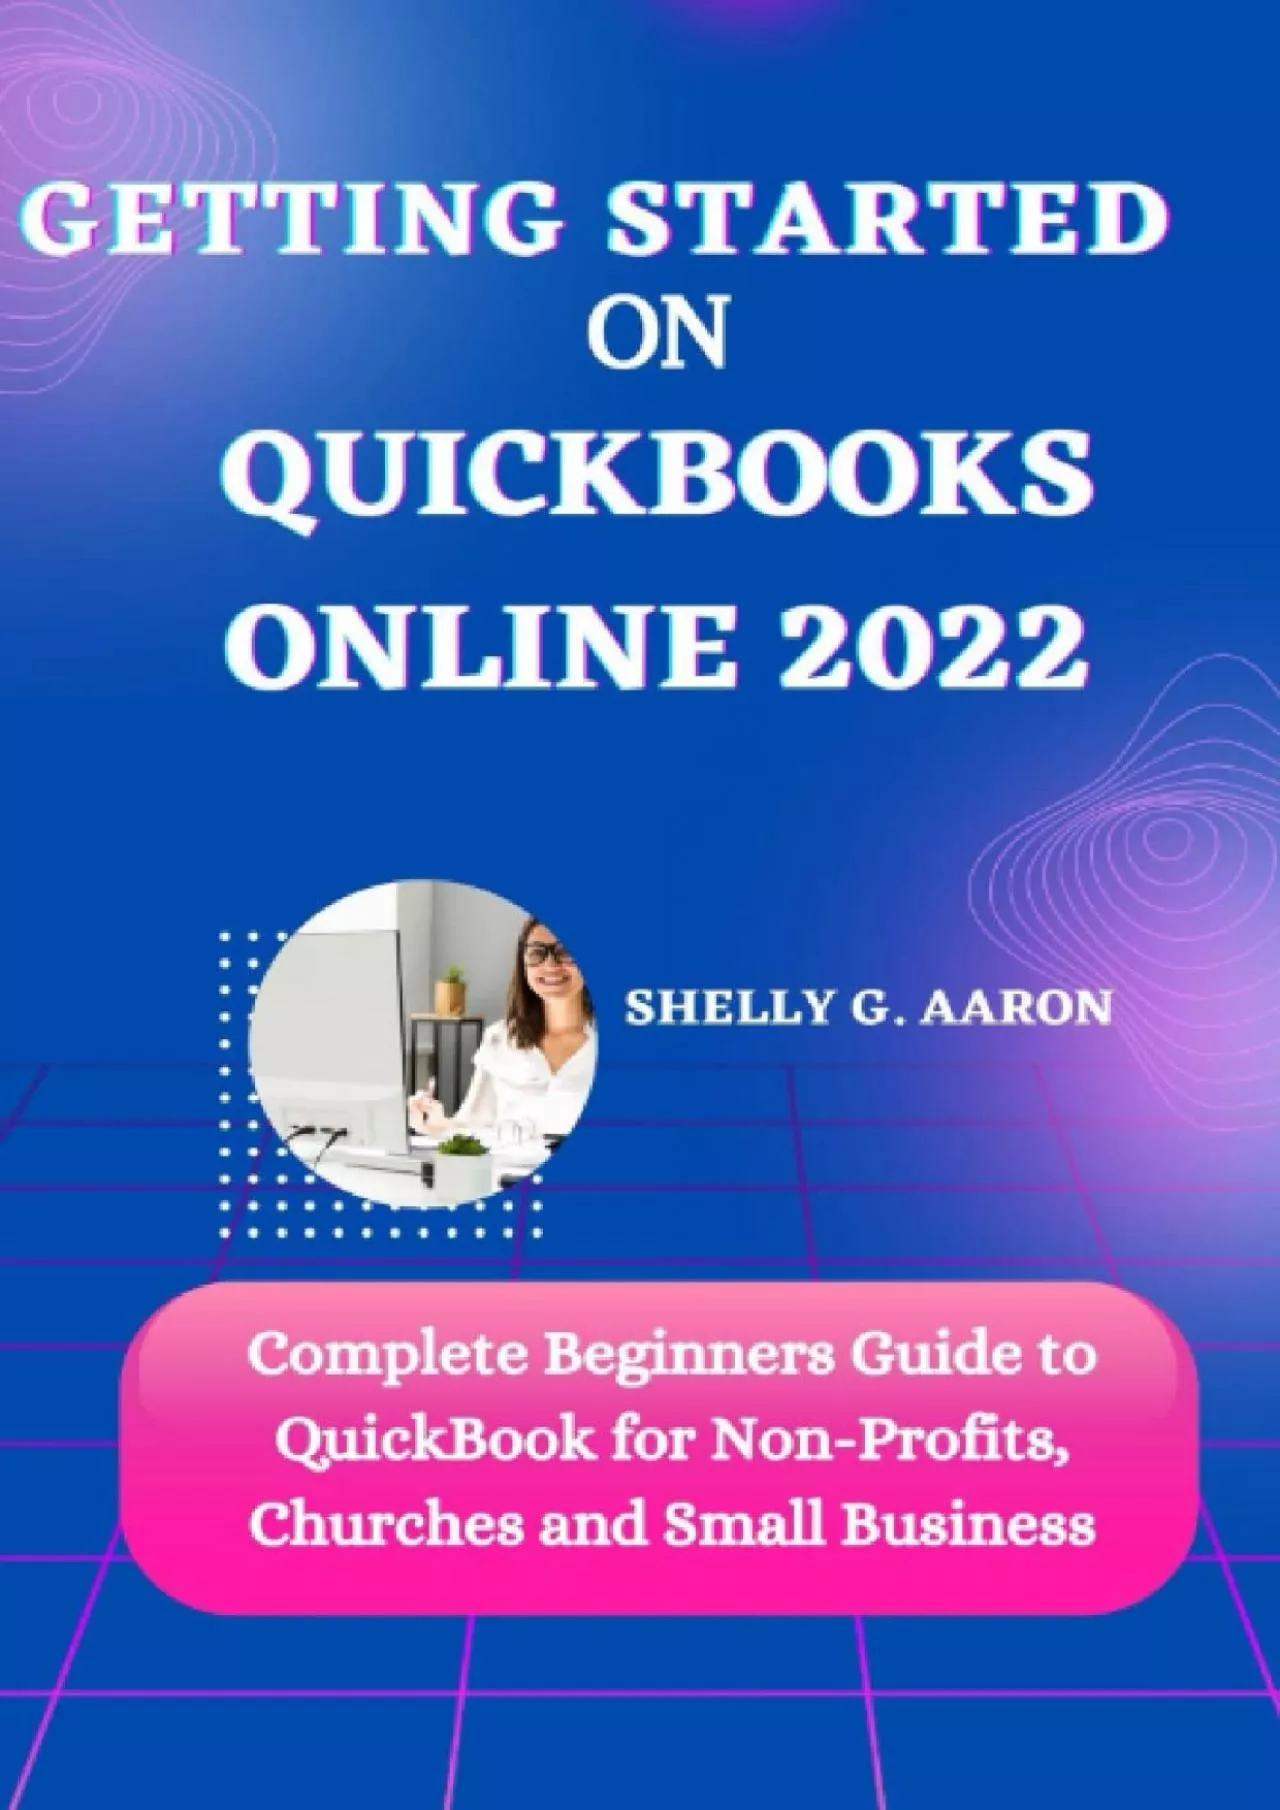 (DOWNLOAD)-Getting Started On QuickBooks Online 2022: Complete Beginners Guide to QuickBook